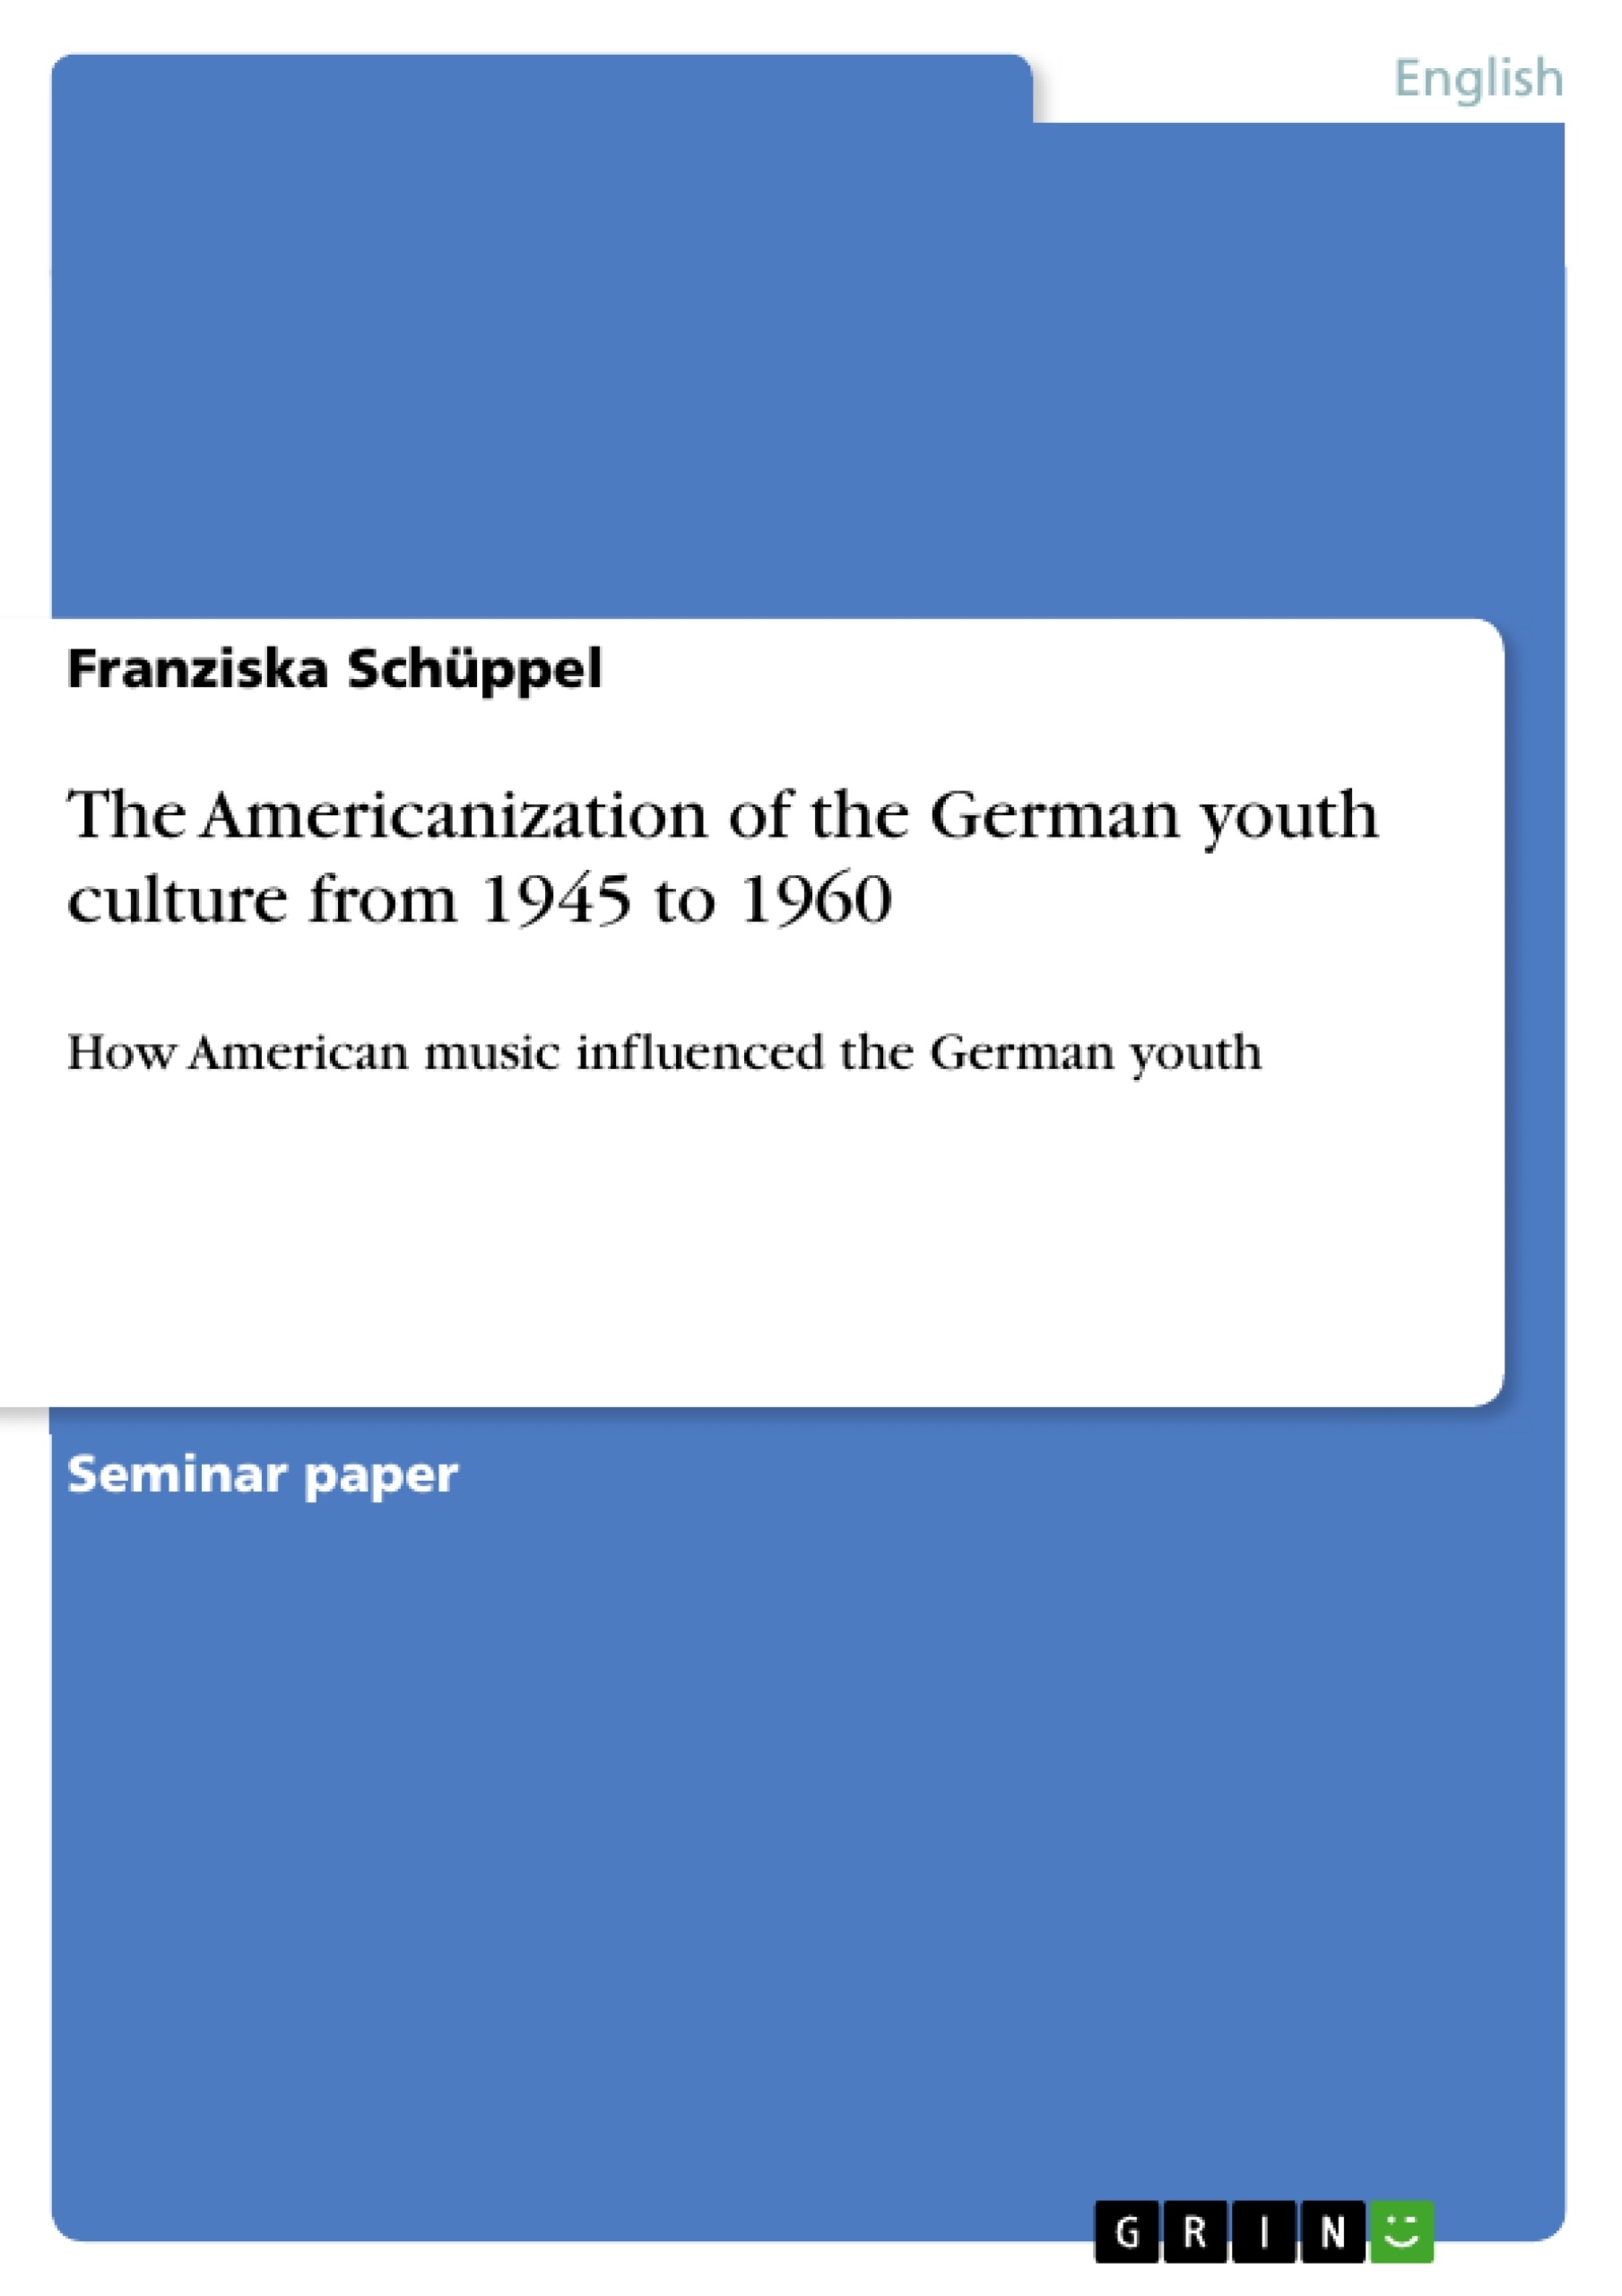 Title: The Americanization of the German youth culture from 1945 to 1960